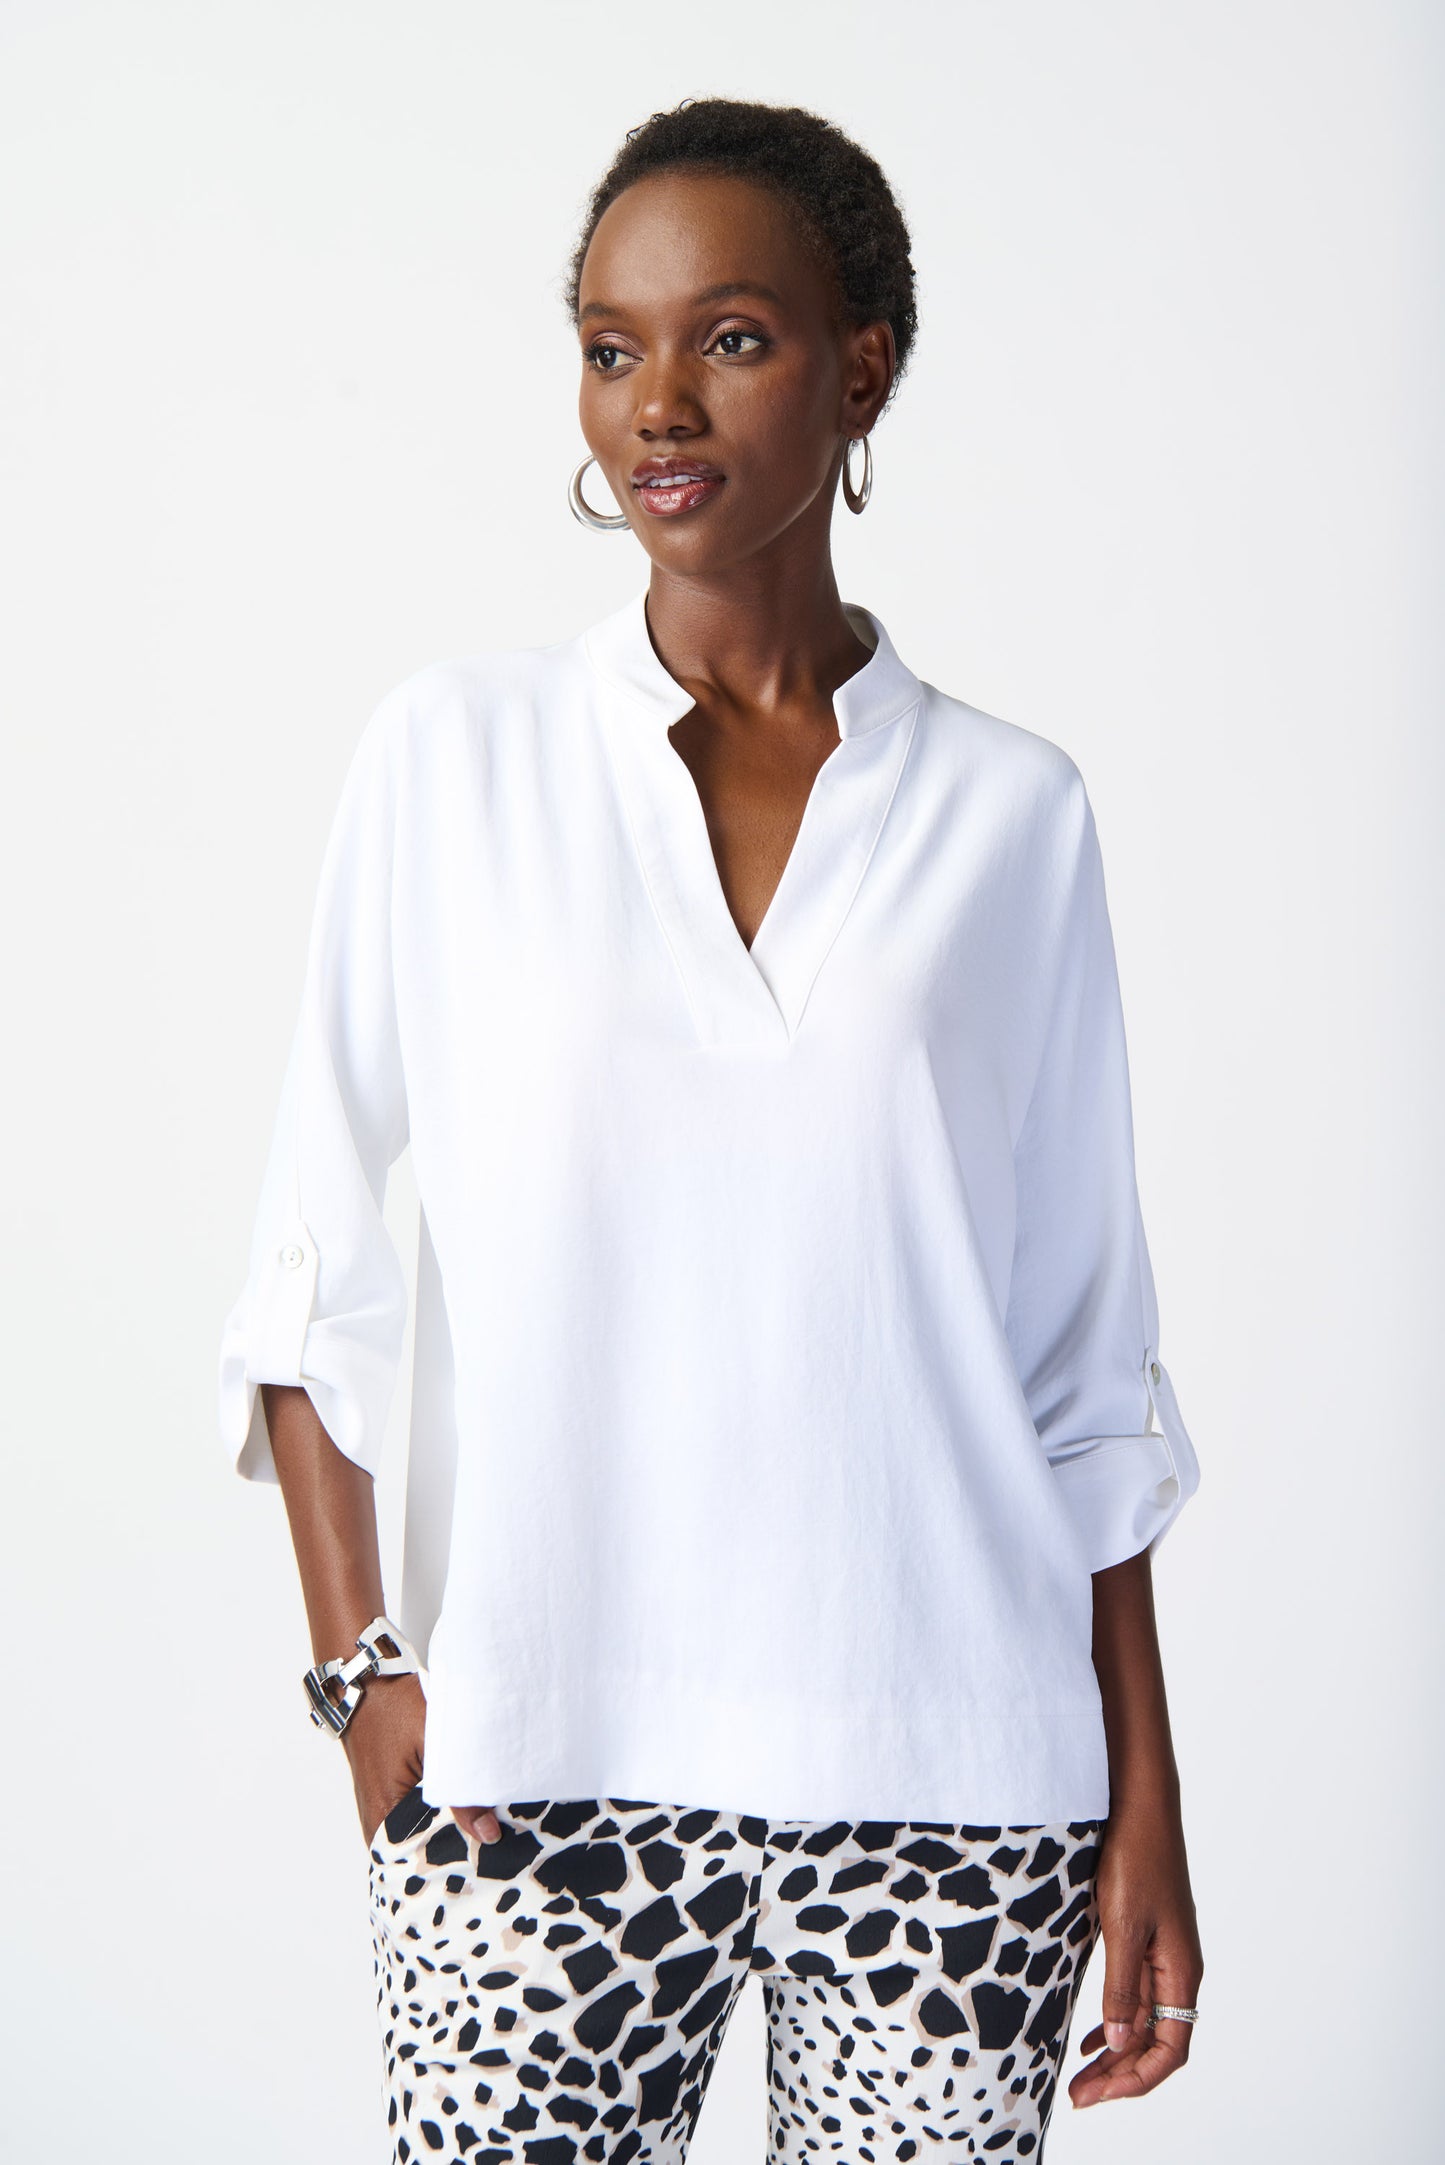 Woven Boxy Top with Dolman Sleeves
241039